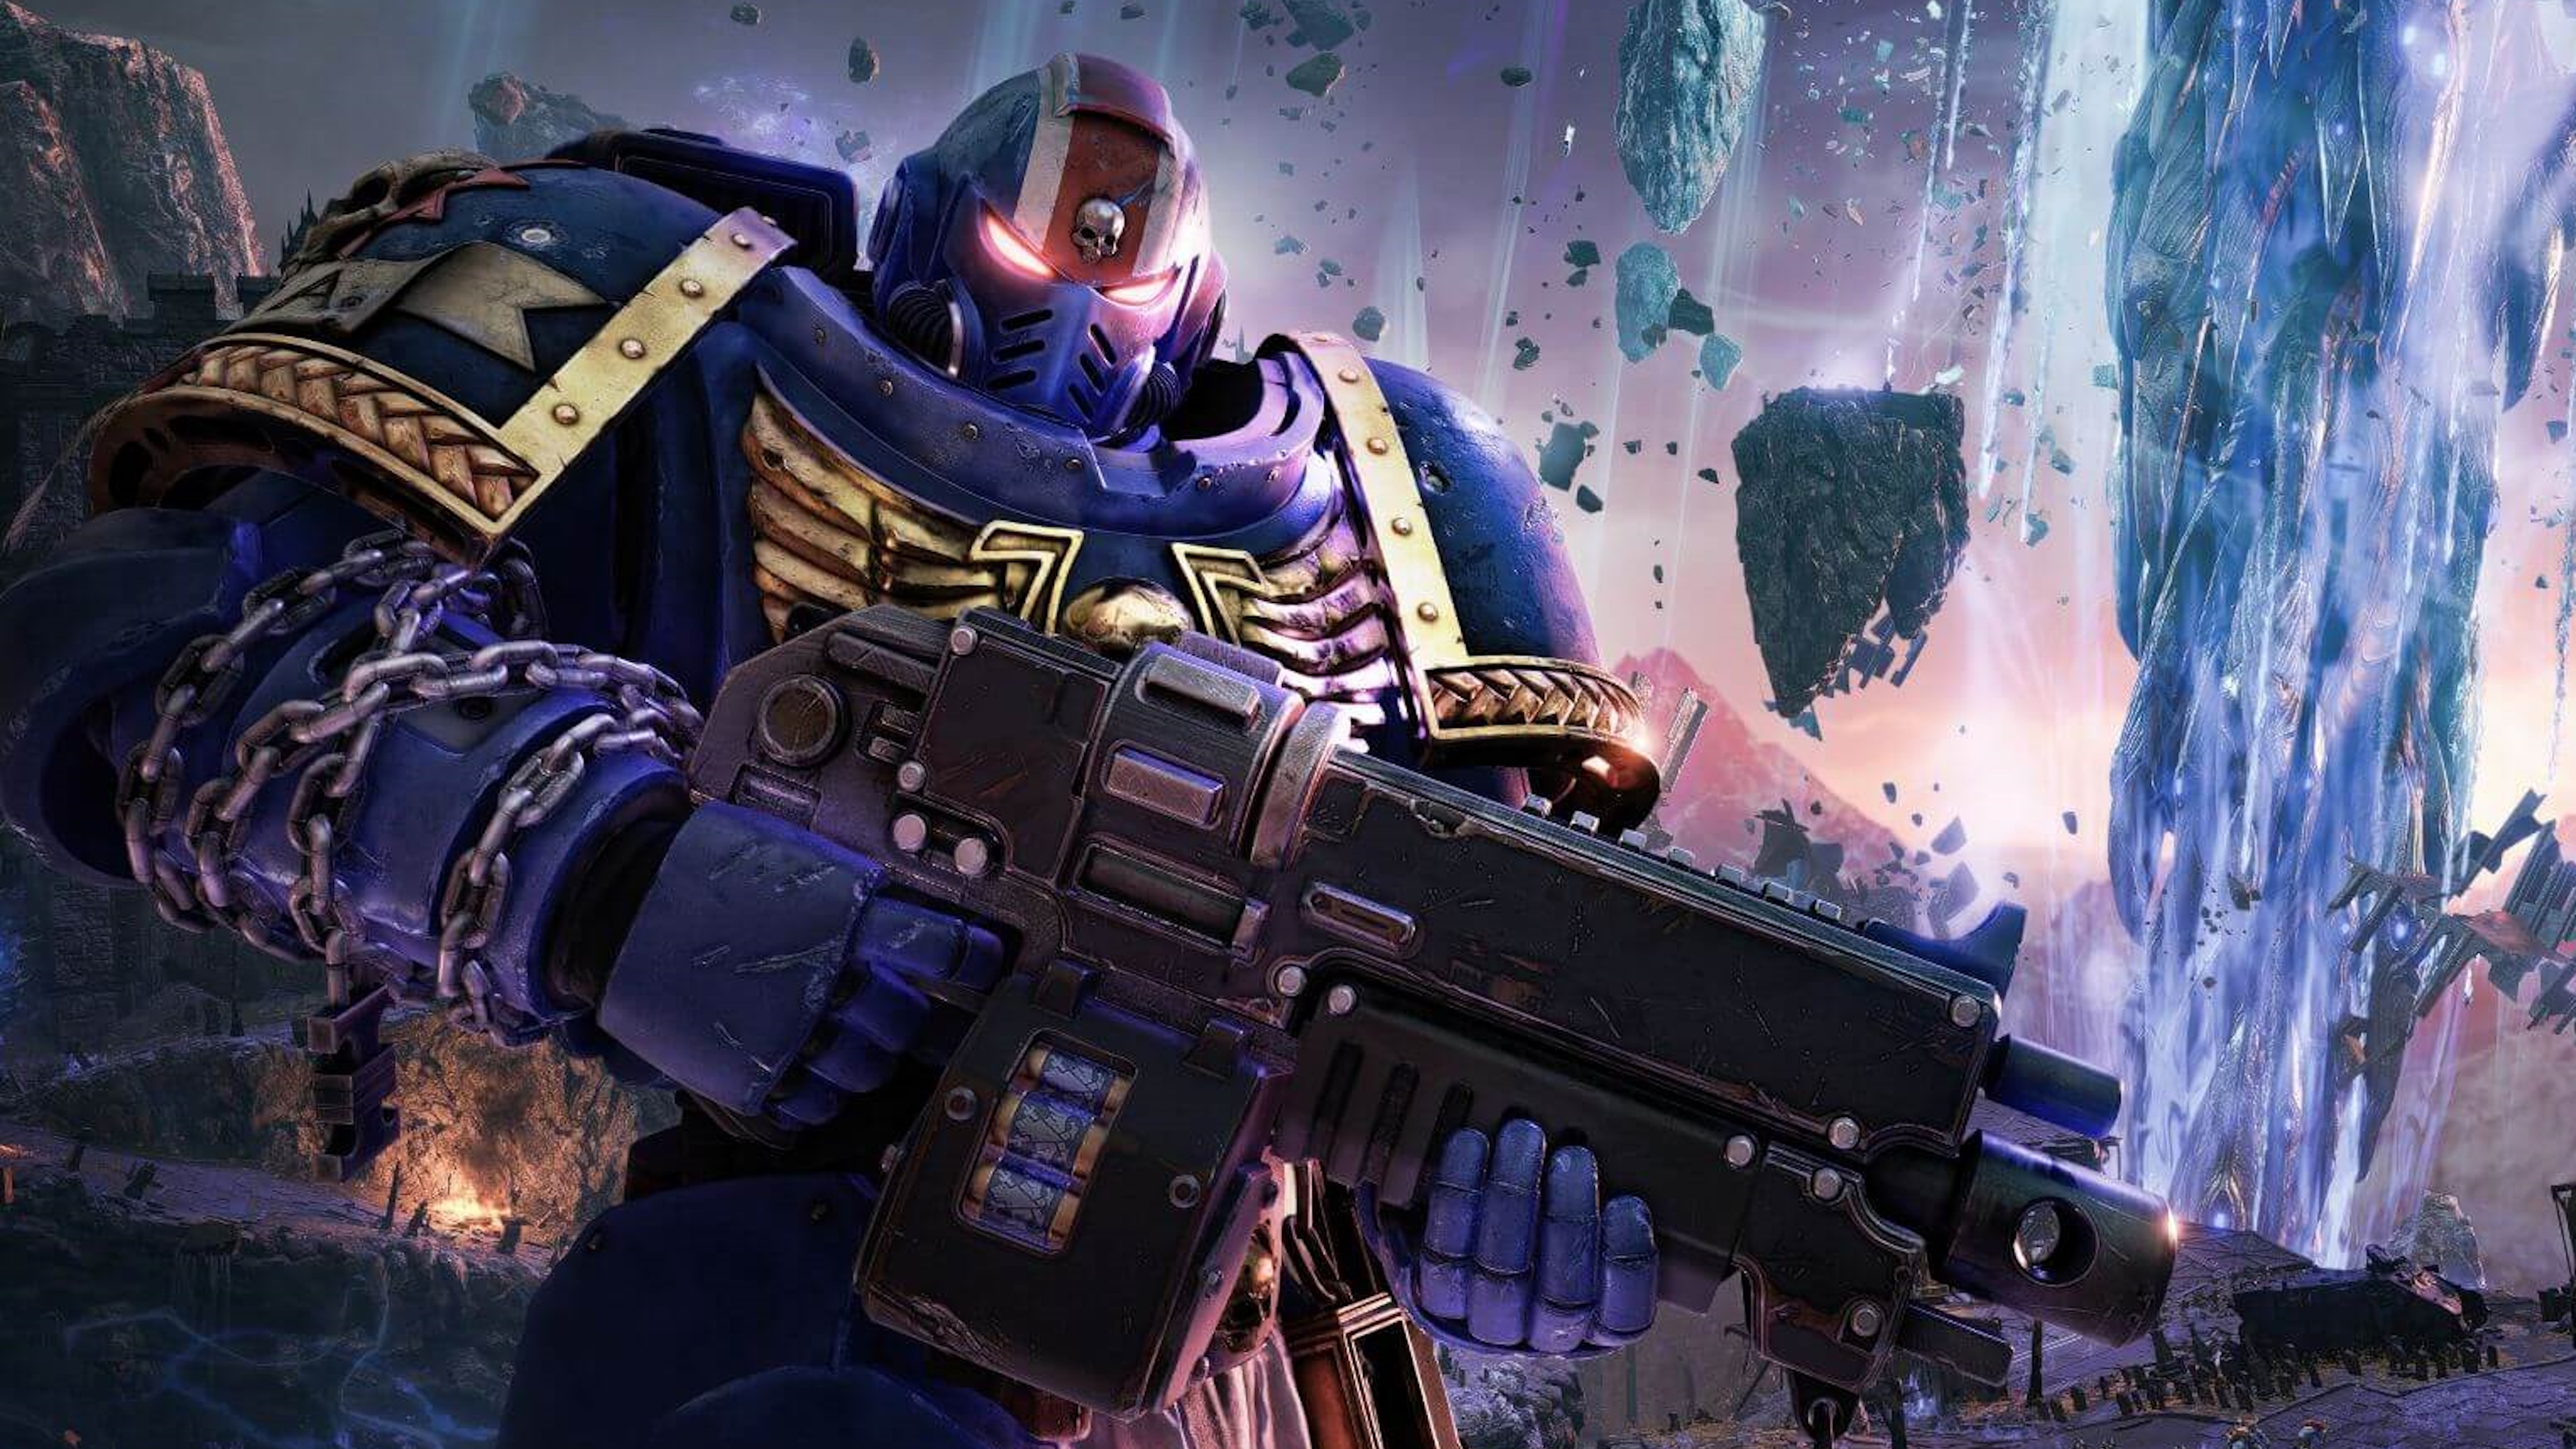 Looks like Space Marine 2 will continue the first game’s grand tradition of PvP multiplayer